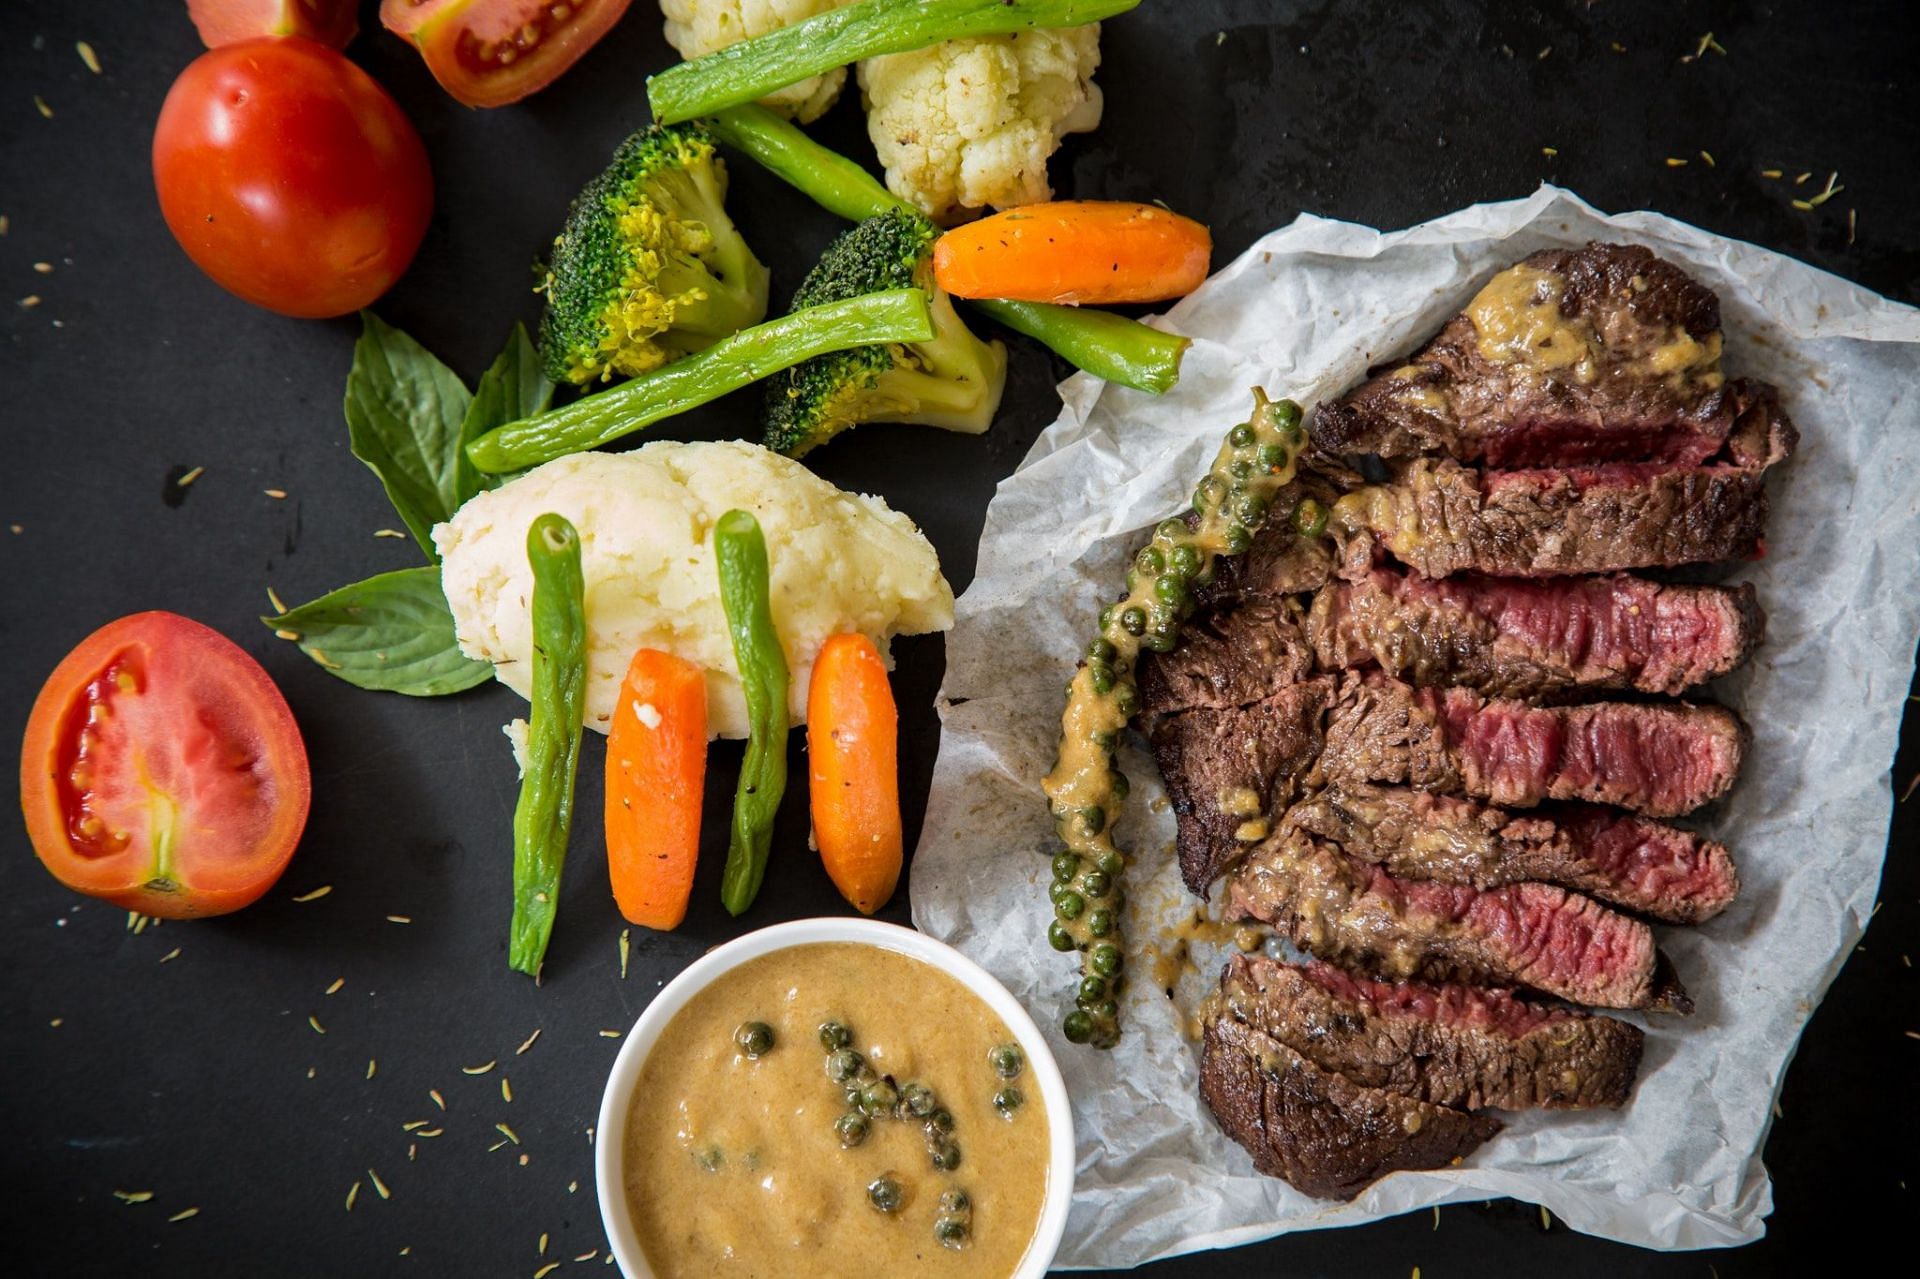 Myths about red meat are widespread (Image via Pexels)